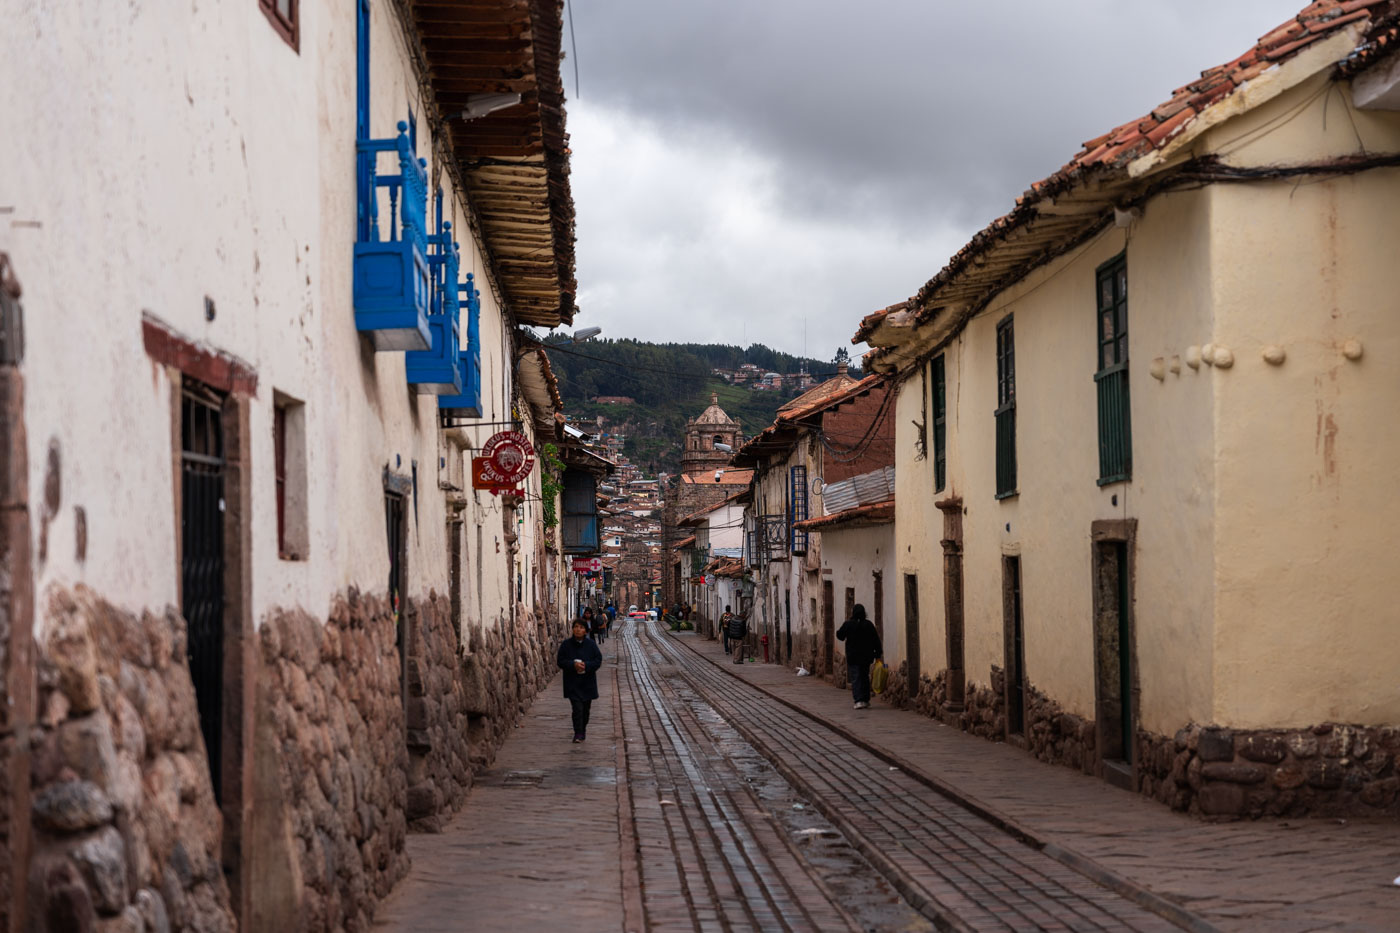 View down one of the main roads in Cusco lined with old Peruvian buildings on an overcast day.